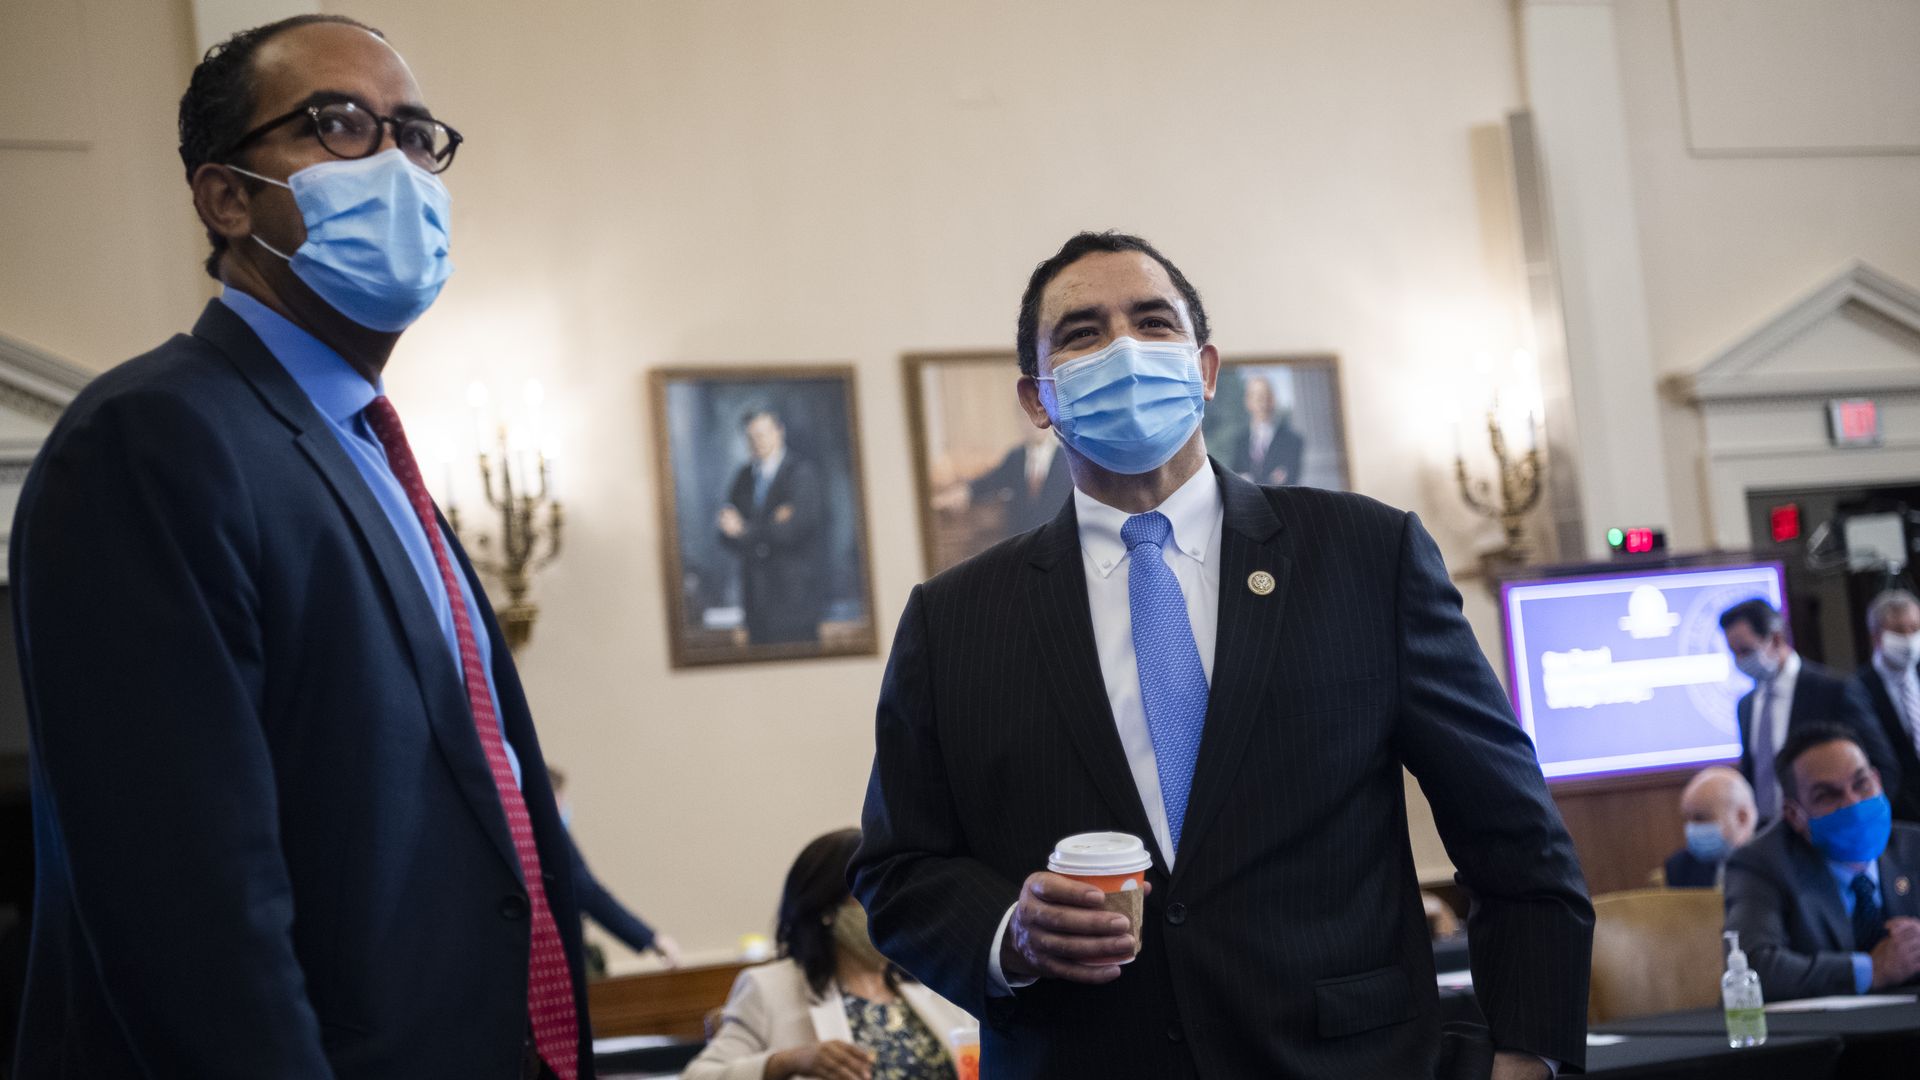 Reps. Henry Cuellar, D-Texas, right, and Will Hurd, R-Texas, attend a House Appropriations Committee markup 